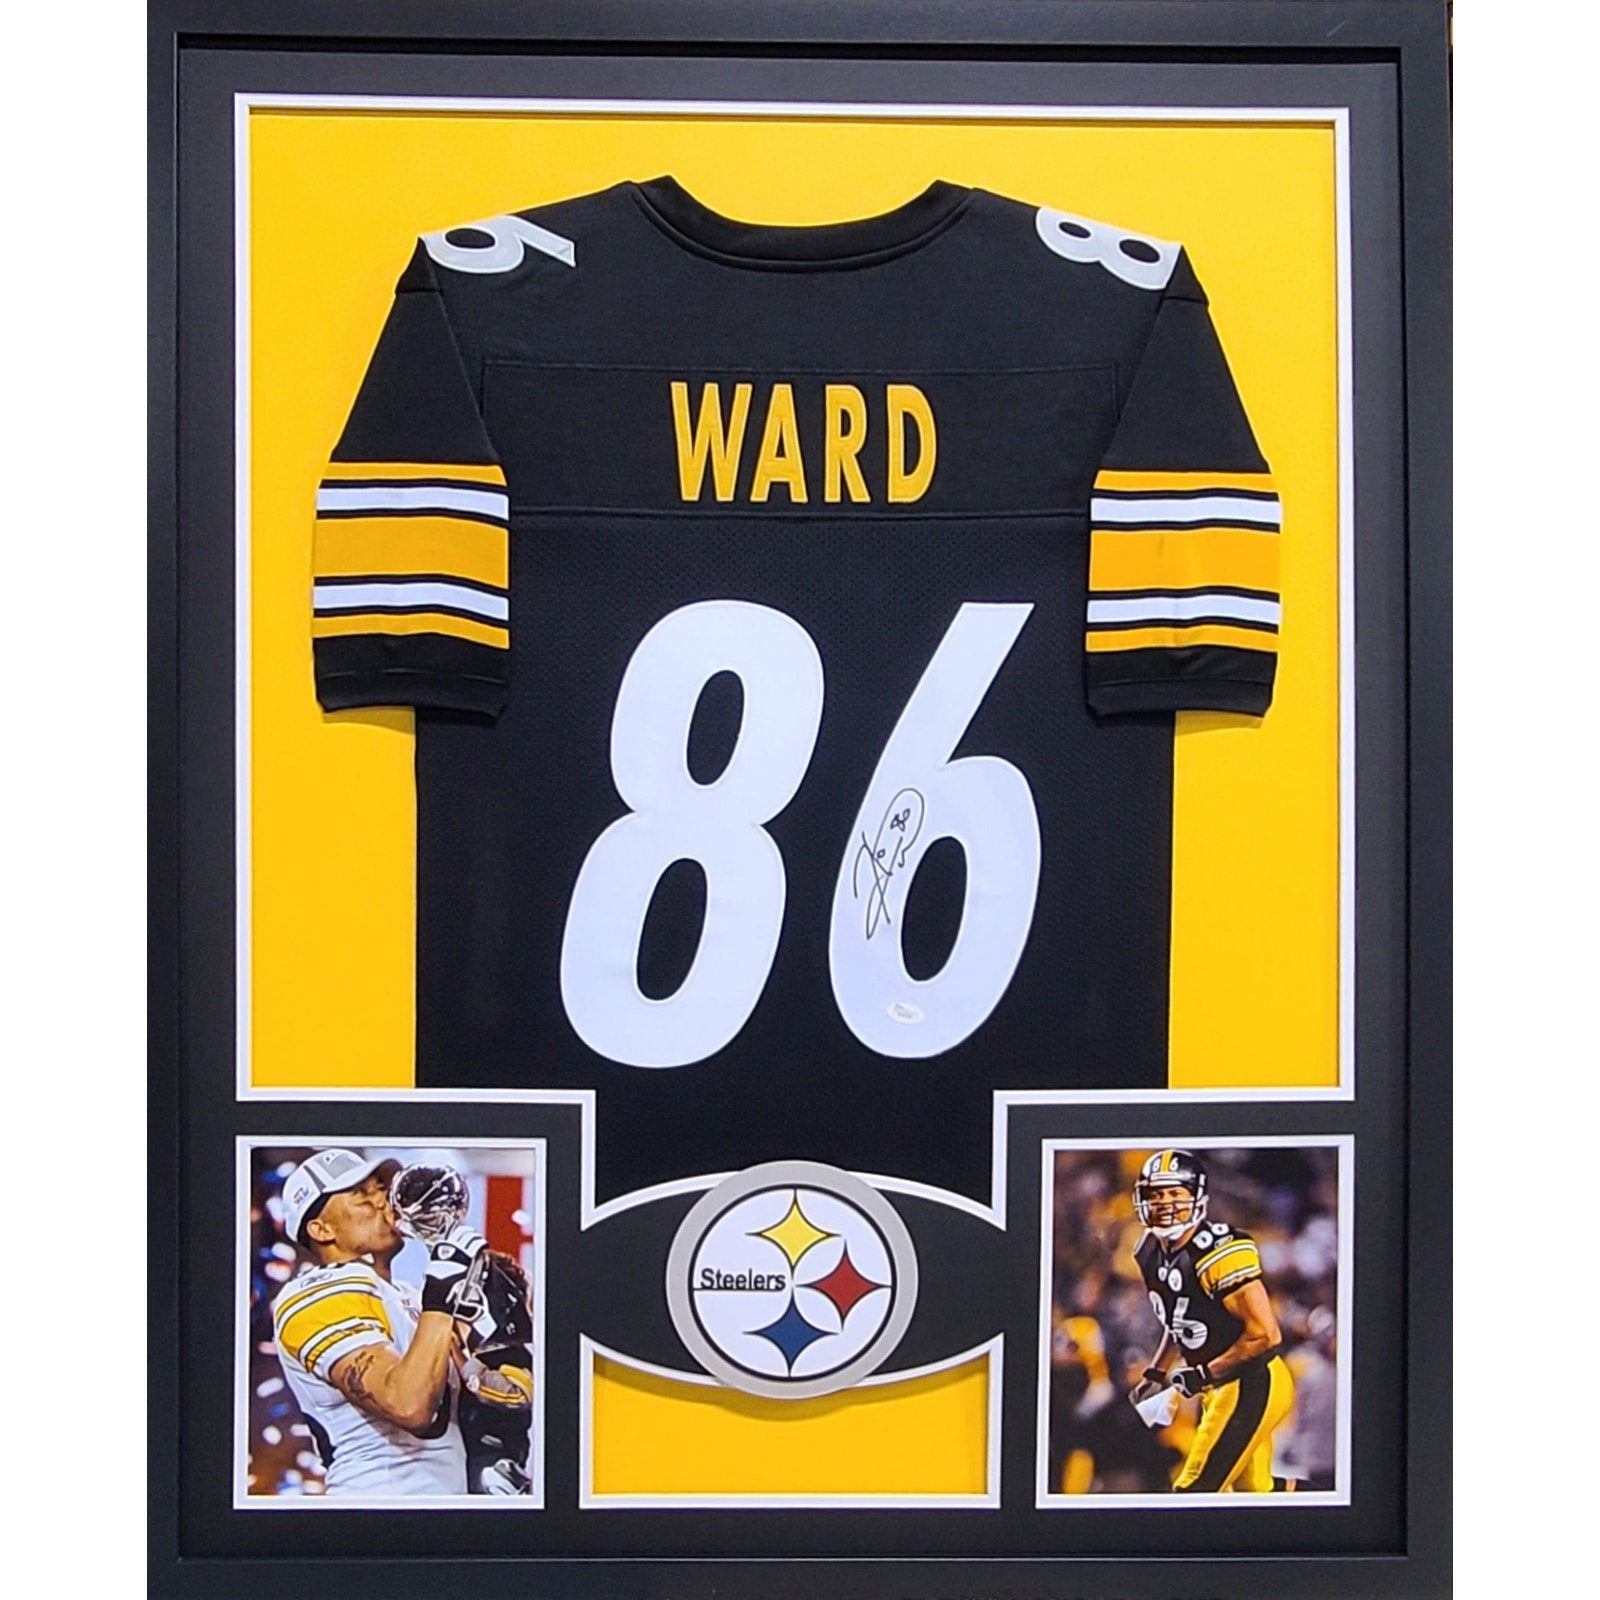 Hines Ward Signed Framed Jersey JSA Autographed Pittsburgh Steelers